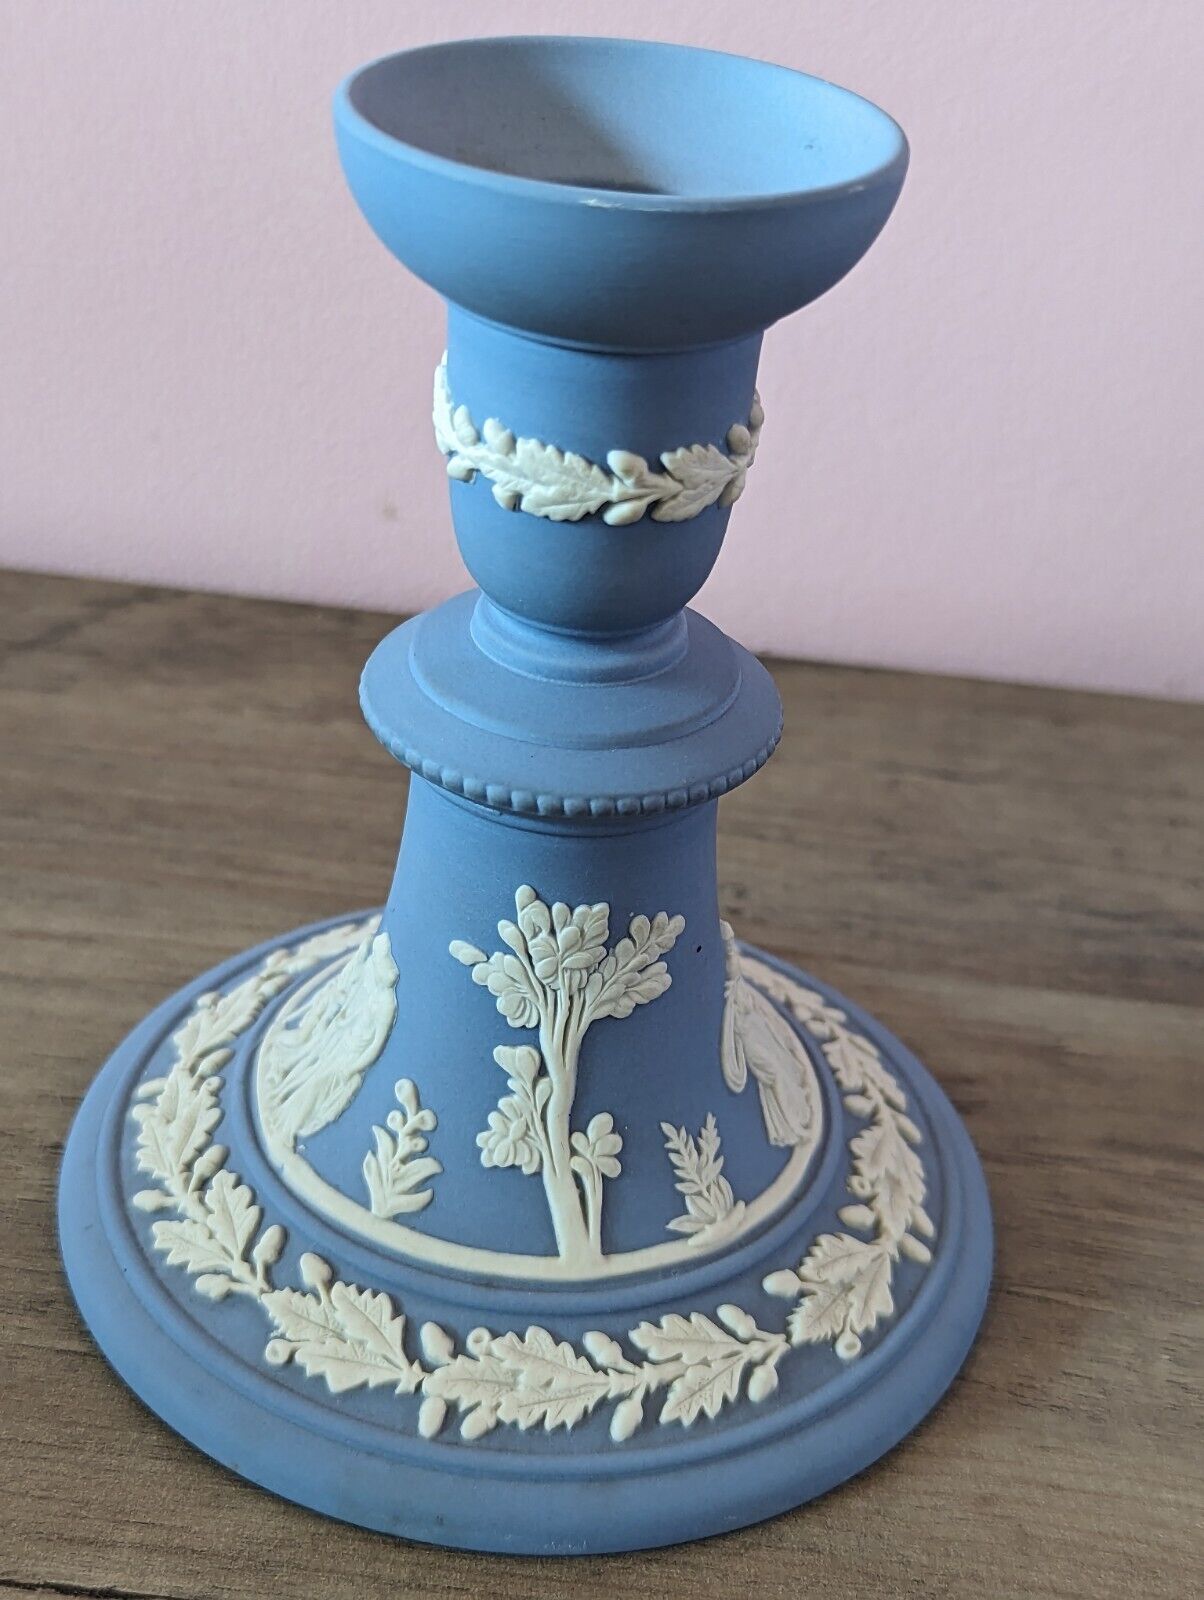 WEDGWOOD JASPER WARE CANDLE HOLDER Beautiful Design and Color